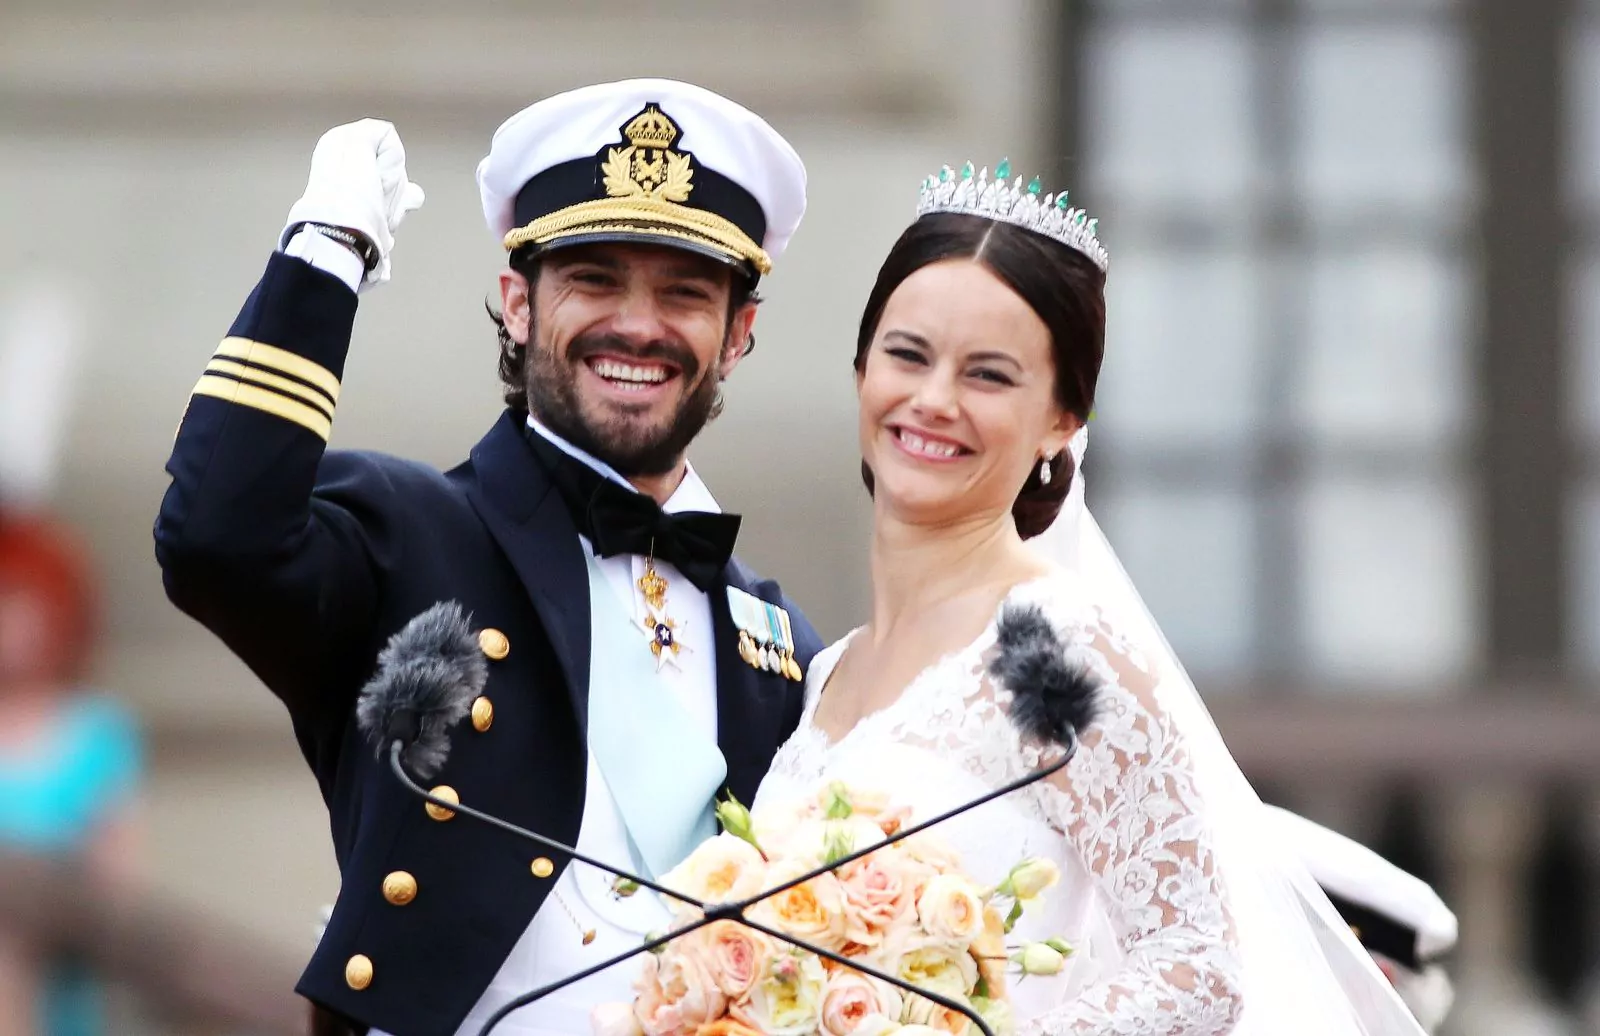 Wedding of Prince Carl Philip of Sweden and Sofia Hellqvist at the Royal Palace in Stockholm, June 13, 2015.